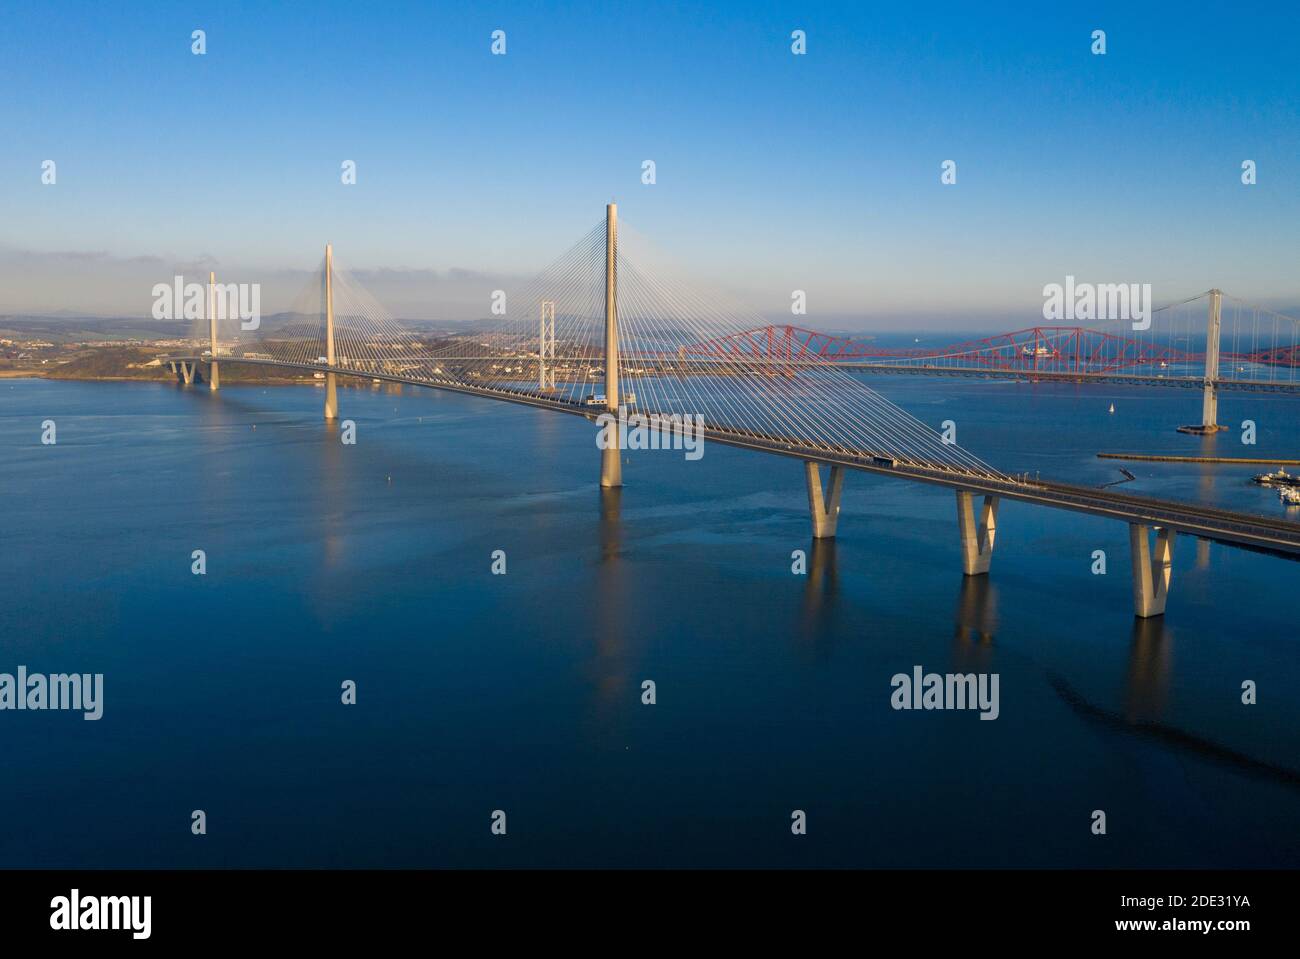 Aerial view of the Queensferry Crossing which spans the Firth of Forth estuary between South and North Queensferry, Scotland. Stock Photo